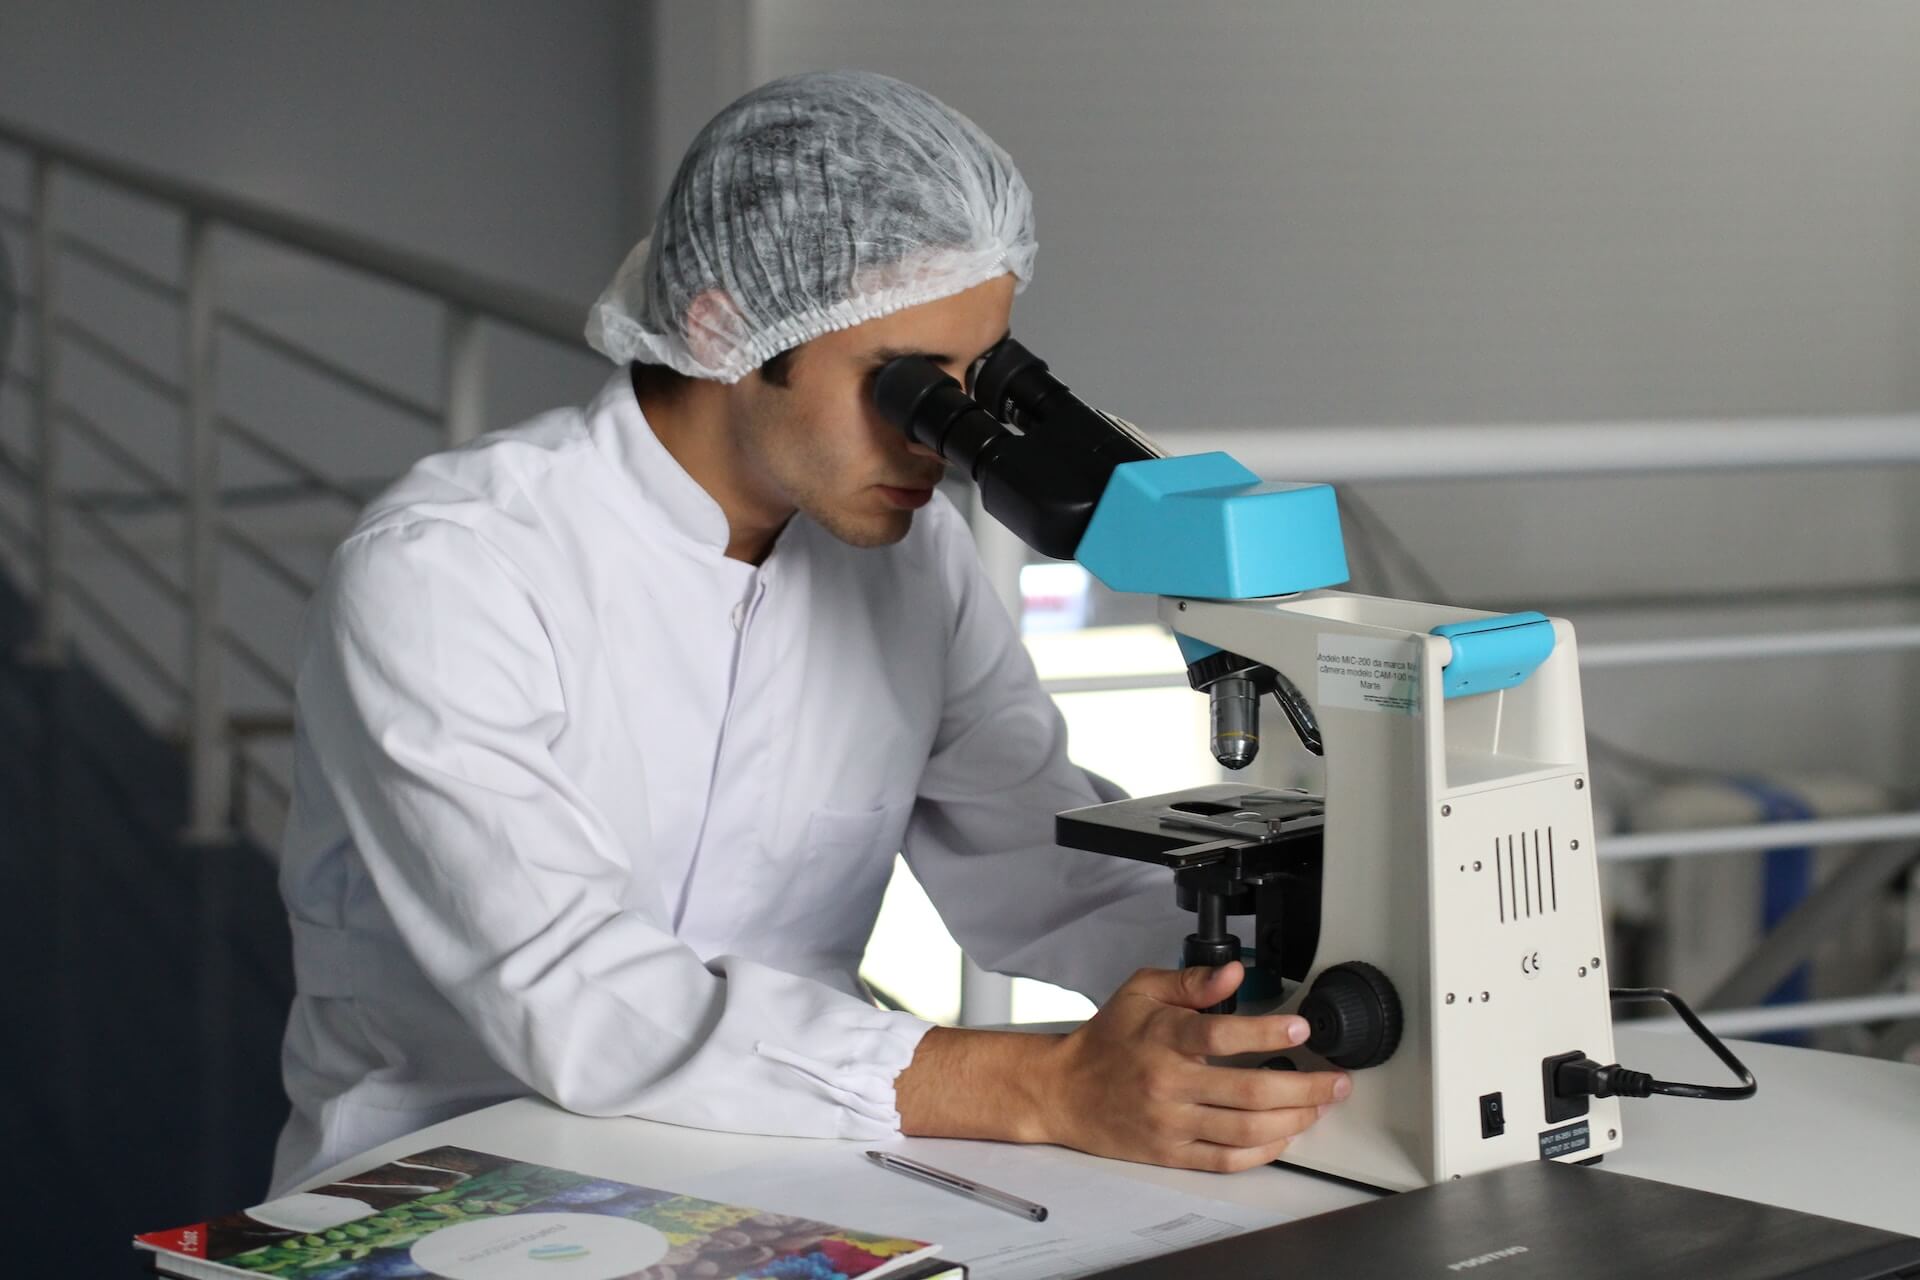 Man looks into microscope in lab